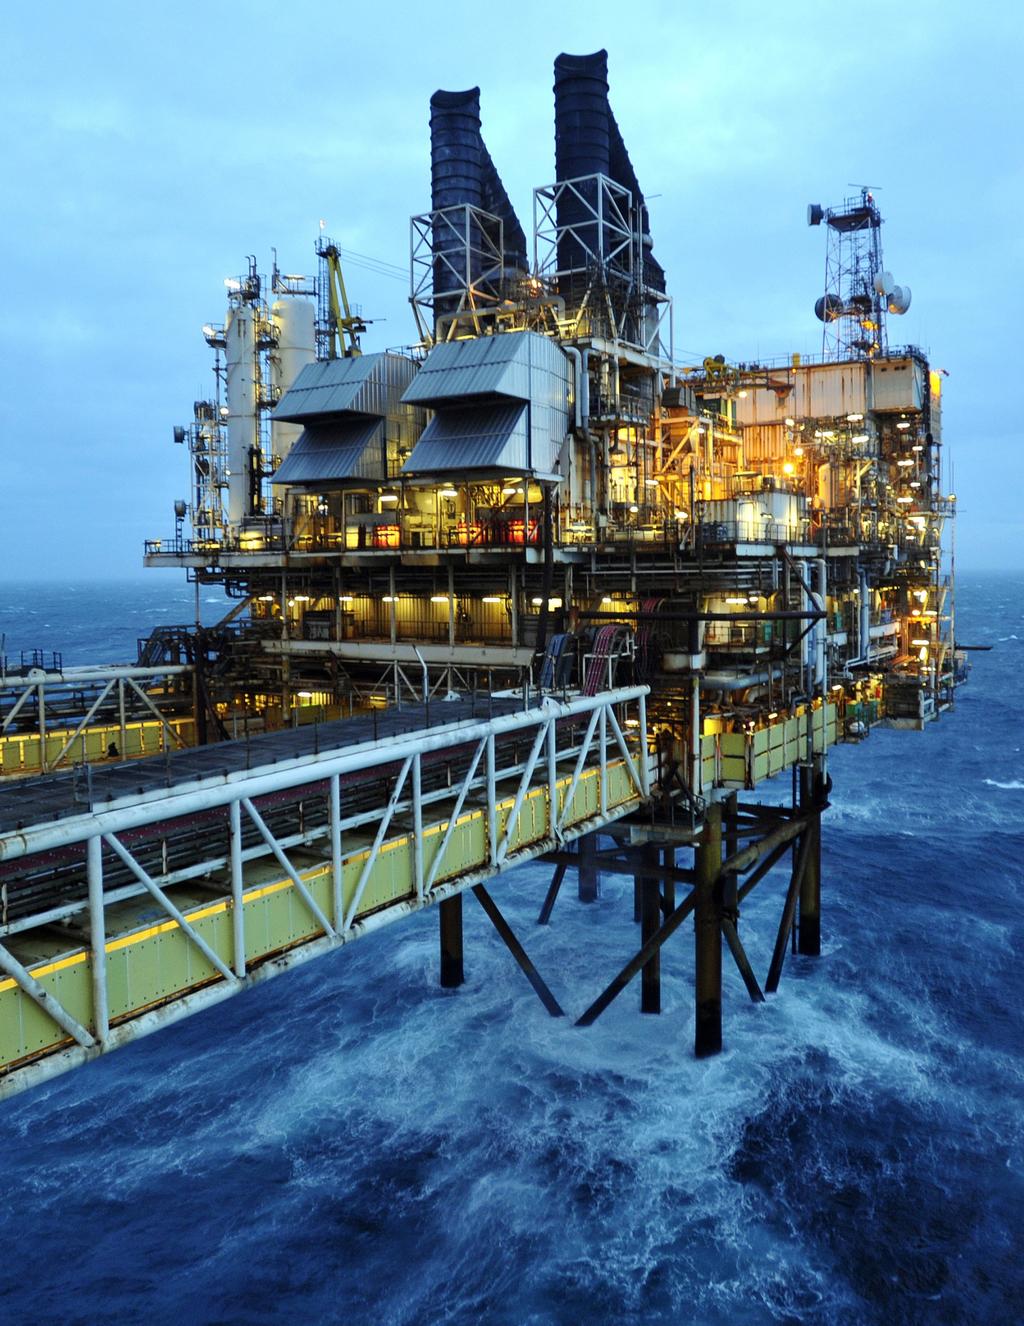 OIL & GAS EXPLORATION IN